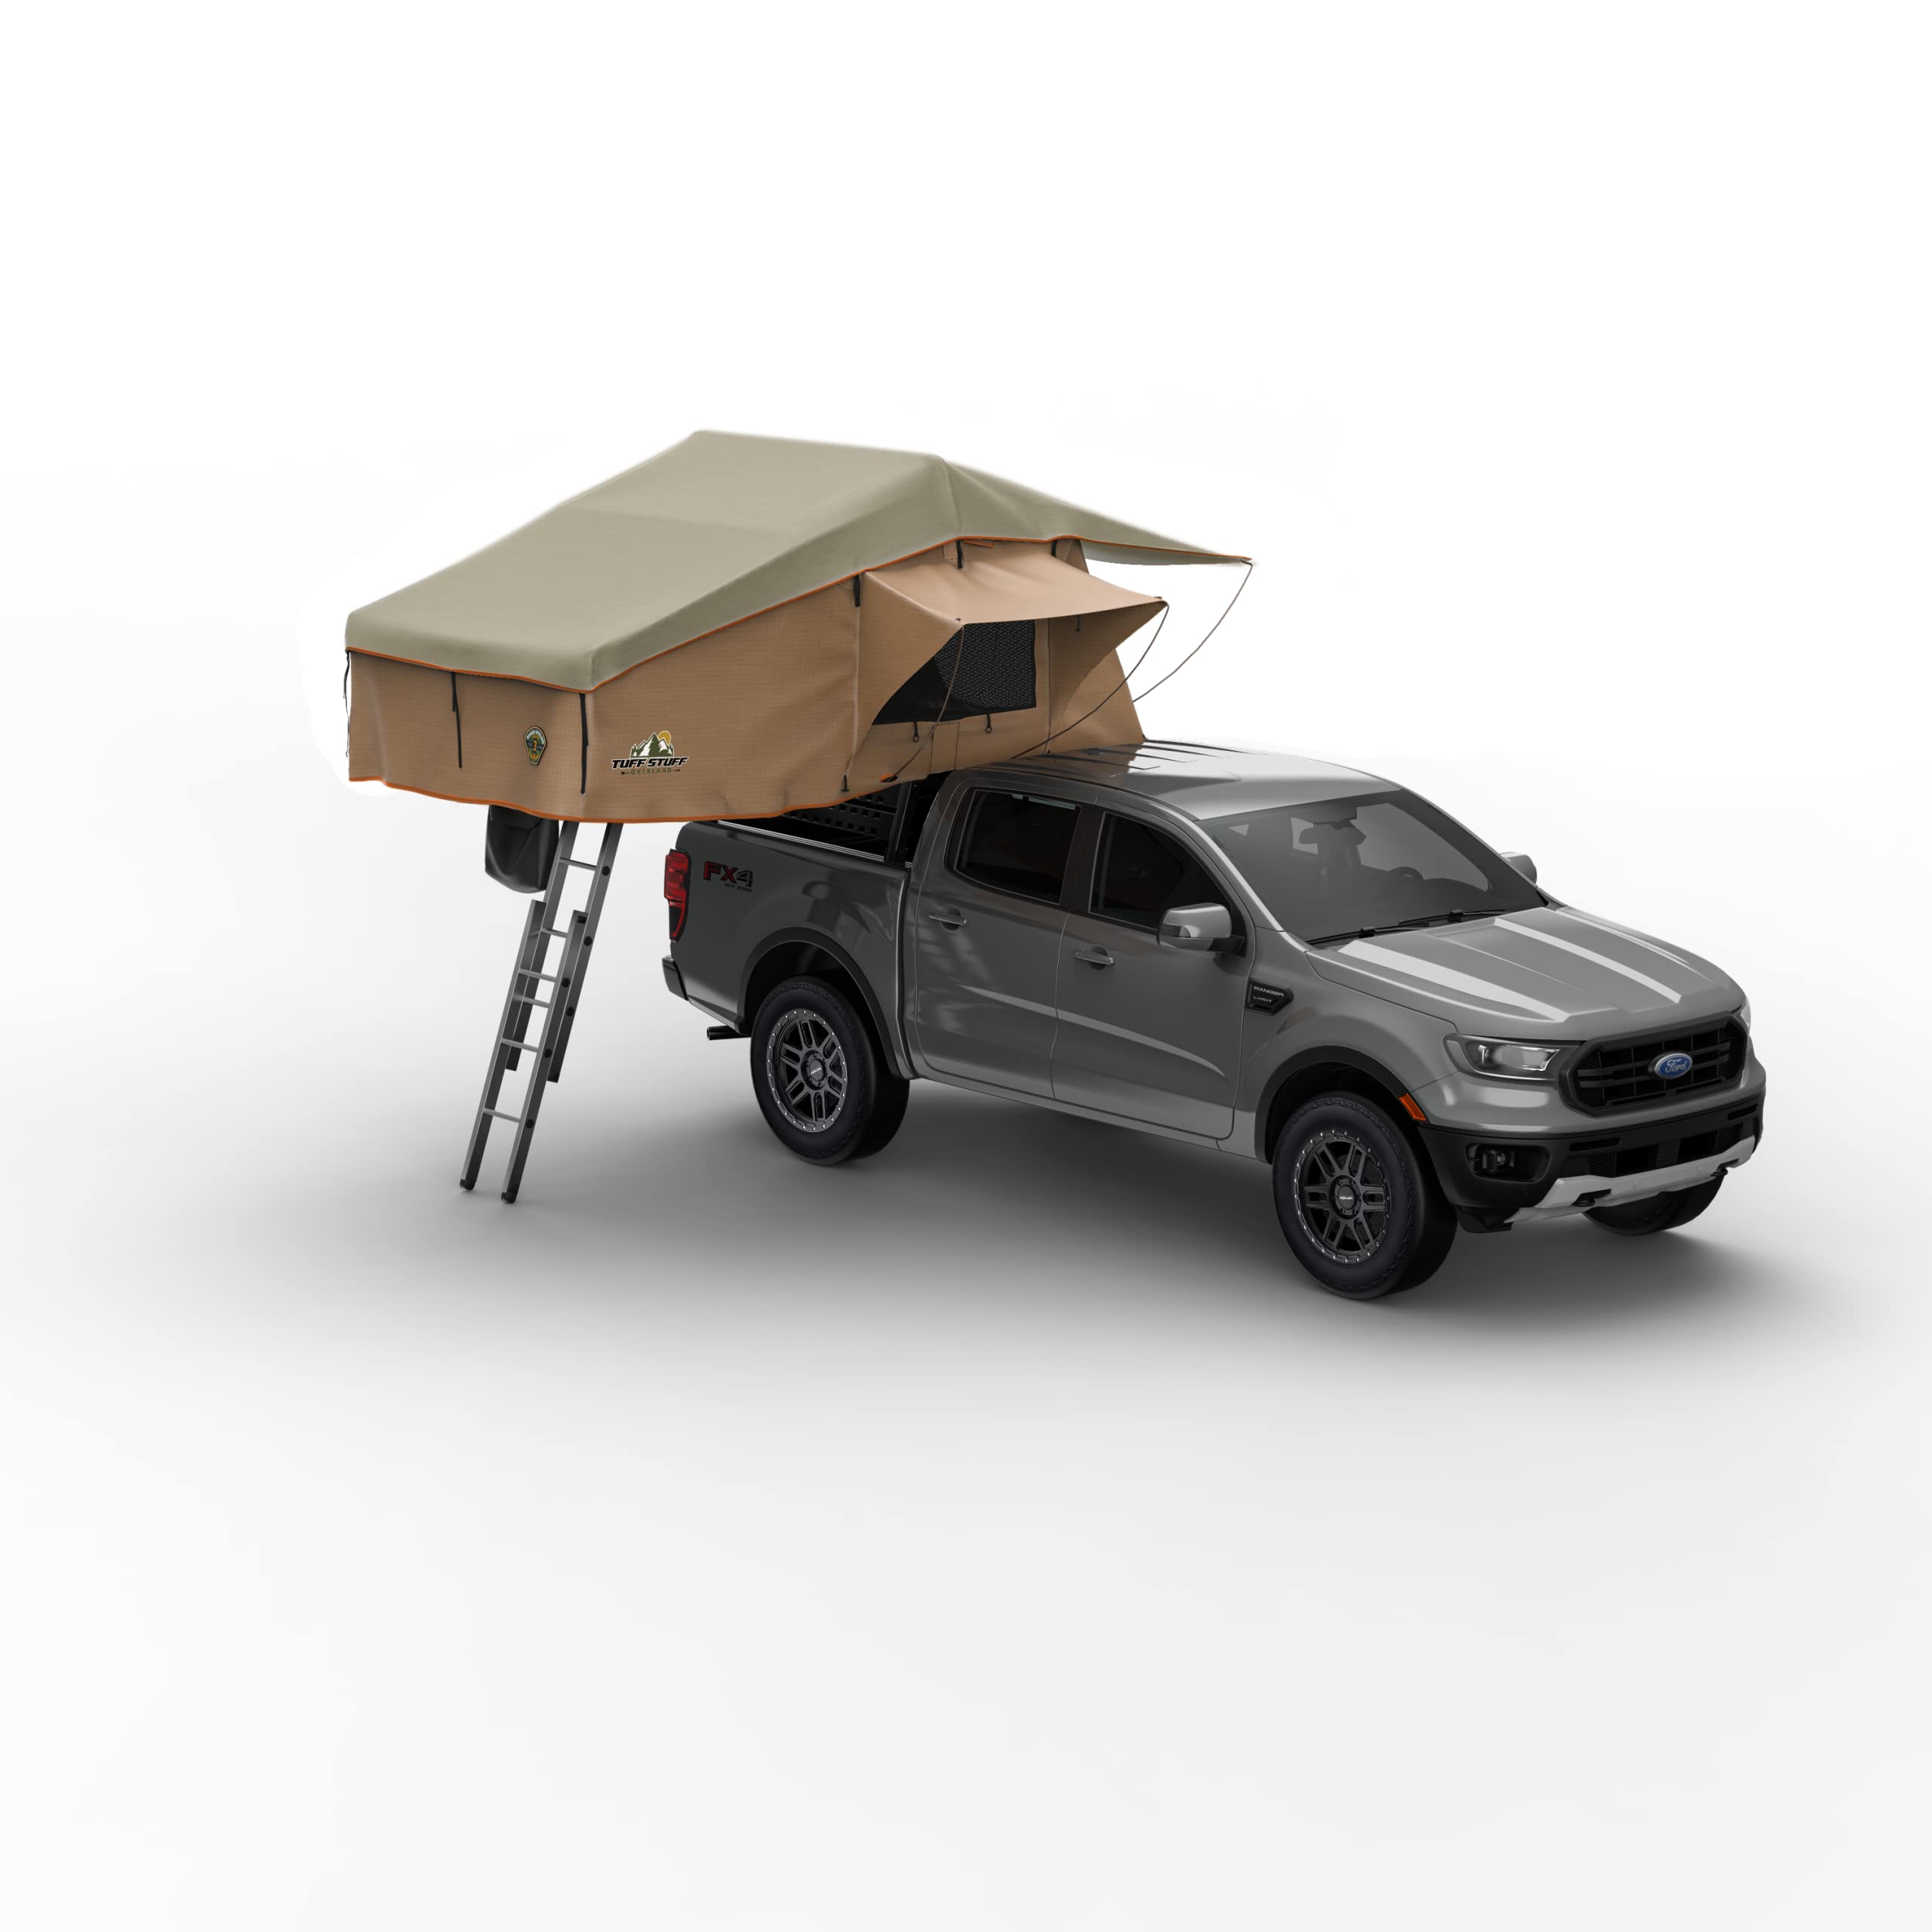 <a href="https://www.amazon.com/TIMBER-Oversized-Folding-Camping-Support/dp/B08DTR8FQF?tag=thecampfire0d-20"></a><a href="https://www.amazon.com/TUFF-Stuff%C2%AE-Ranger-OverlandTM-Person/dp/B0BCN183P1?tag=thecampfire0d-20">TUFF Stuff® Ranger Overland™ ROOF TOP Tent, 3 Person, 65"</a>